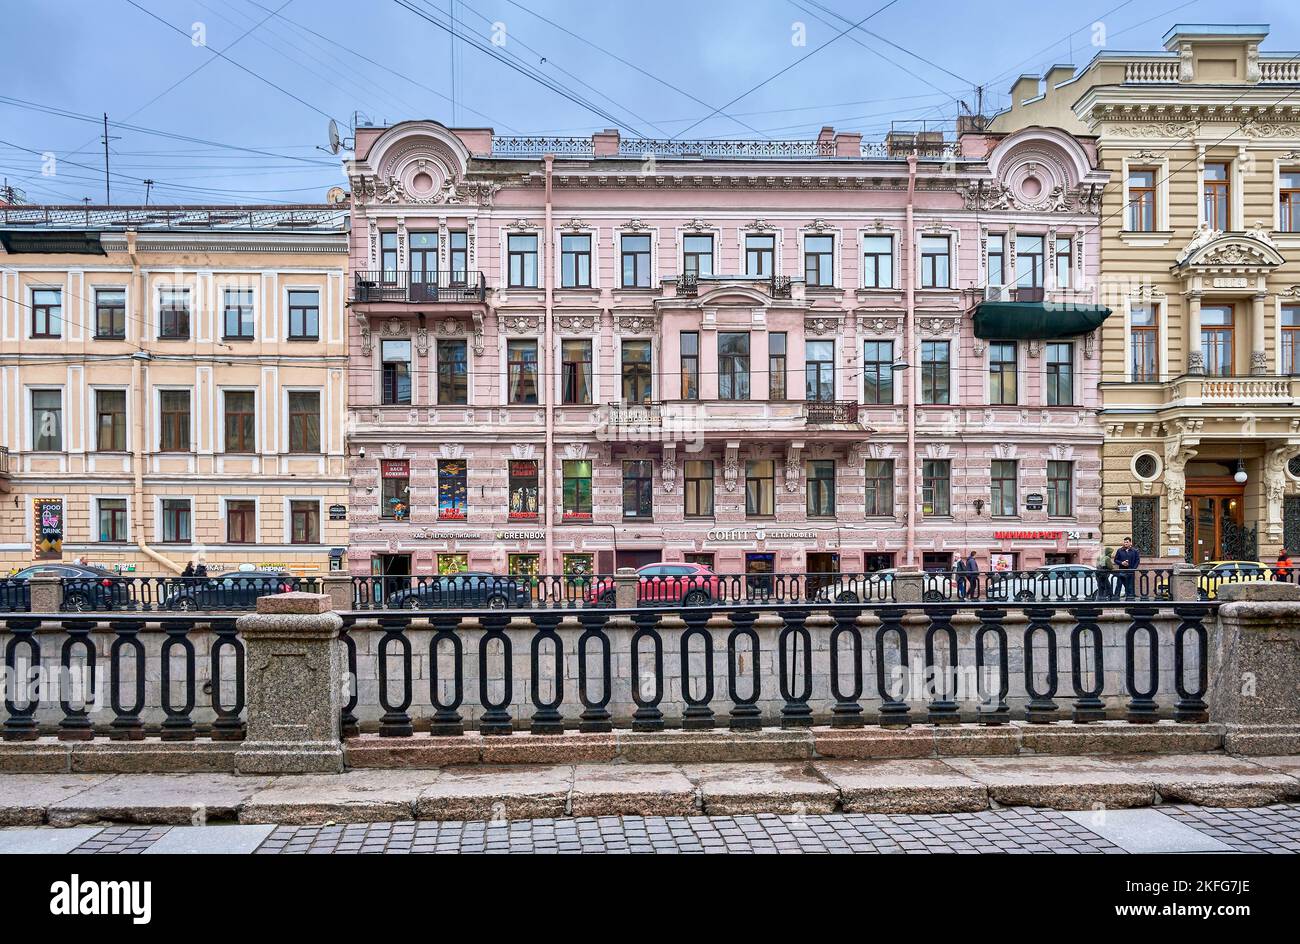 Griboyedov Canal, view of the former house of K.I. Imzen - Tomashevskaya, built in the eclectic style in 1875, landmark: St. Petersburg, Russia - Octo Stock Photo